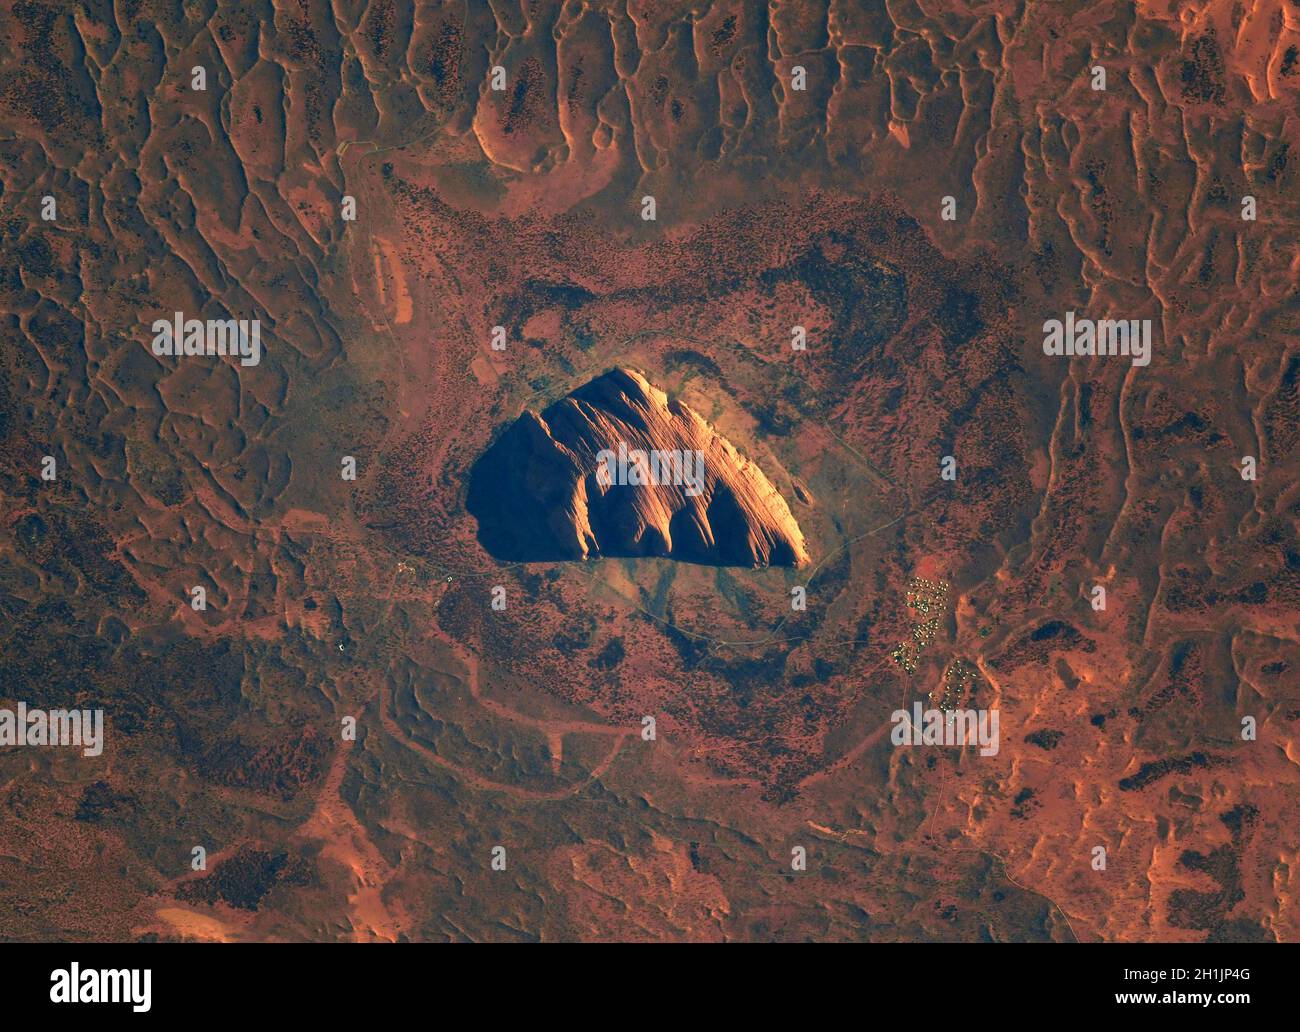 A view of Earth from the International Space Station: Uluru, formerly known as Ayers Rock, Australia in the morning. A revered sacred site.  An optimised and digitally enhanced version of a NASA/ ESA image. Mandatory Credit: NASA/ESA/T. Pesquet. NB: Usage restrictions: Not to be presented as an endorsement. Stock Photo